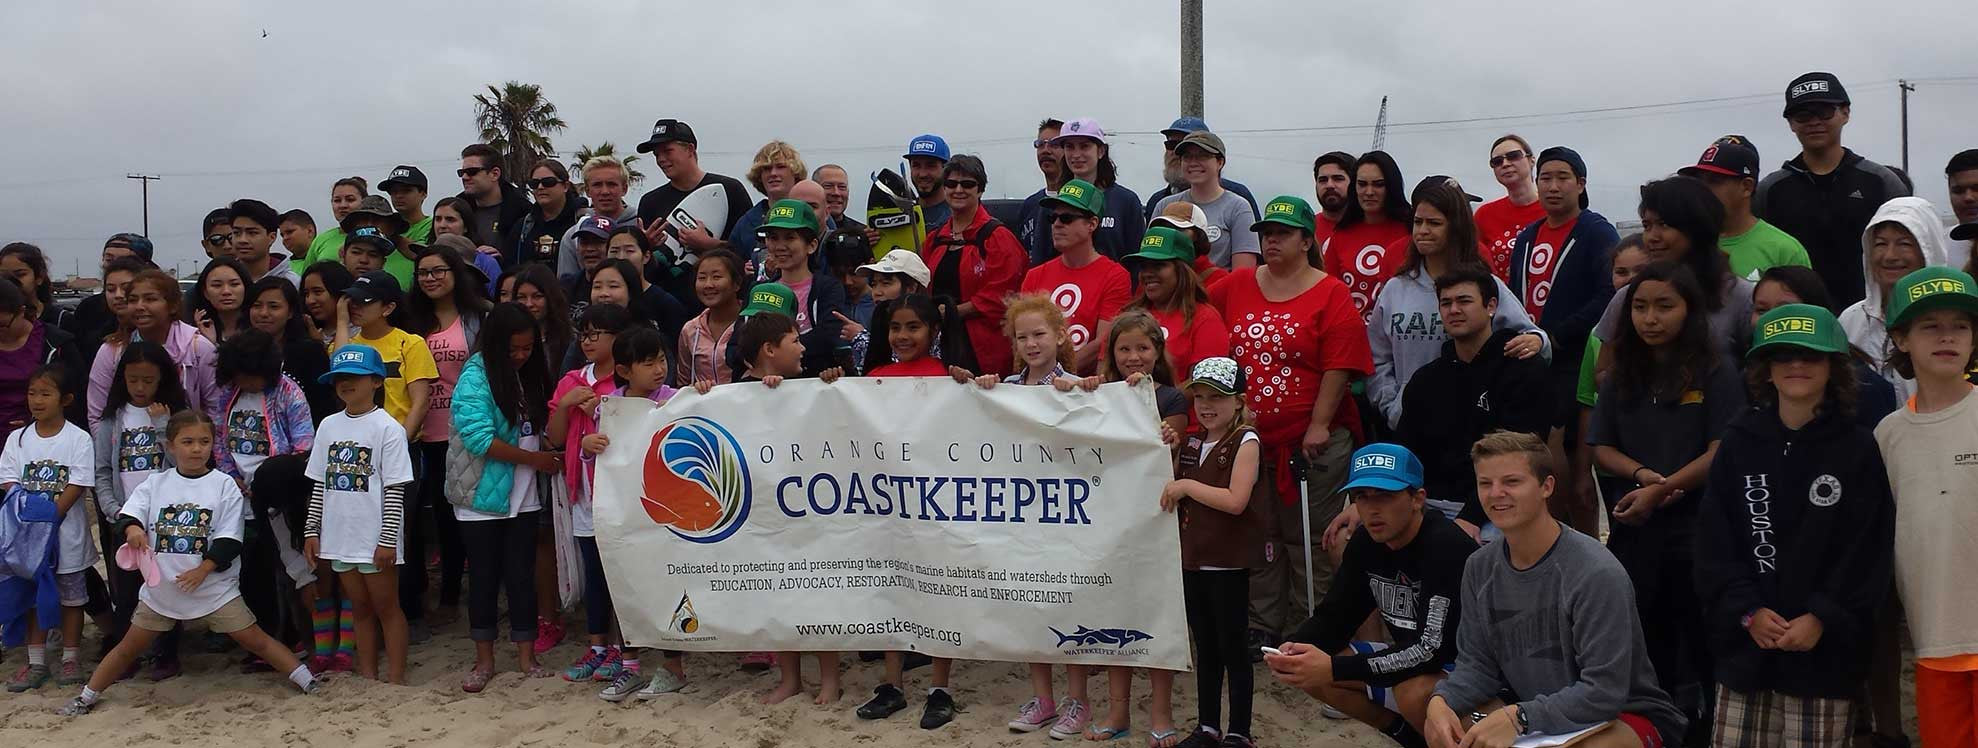 Beach Clean Up: 10188 lbs of Trash Picked Up Off Huntington Beach